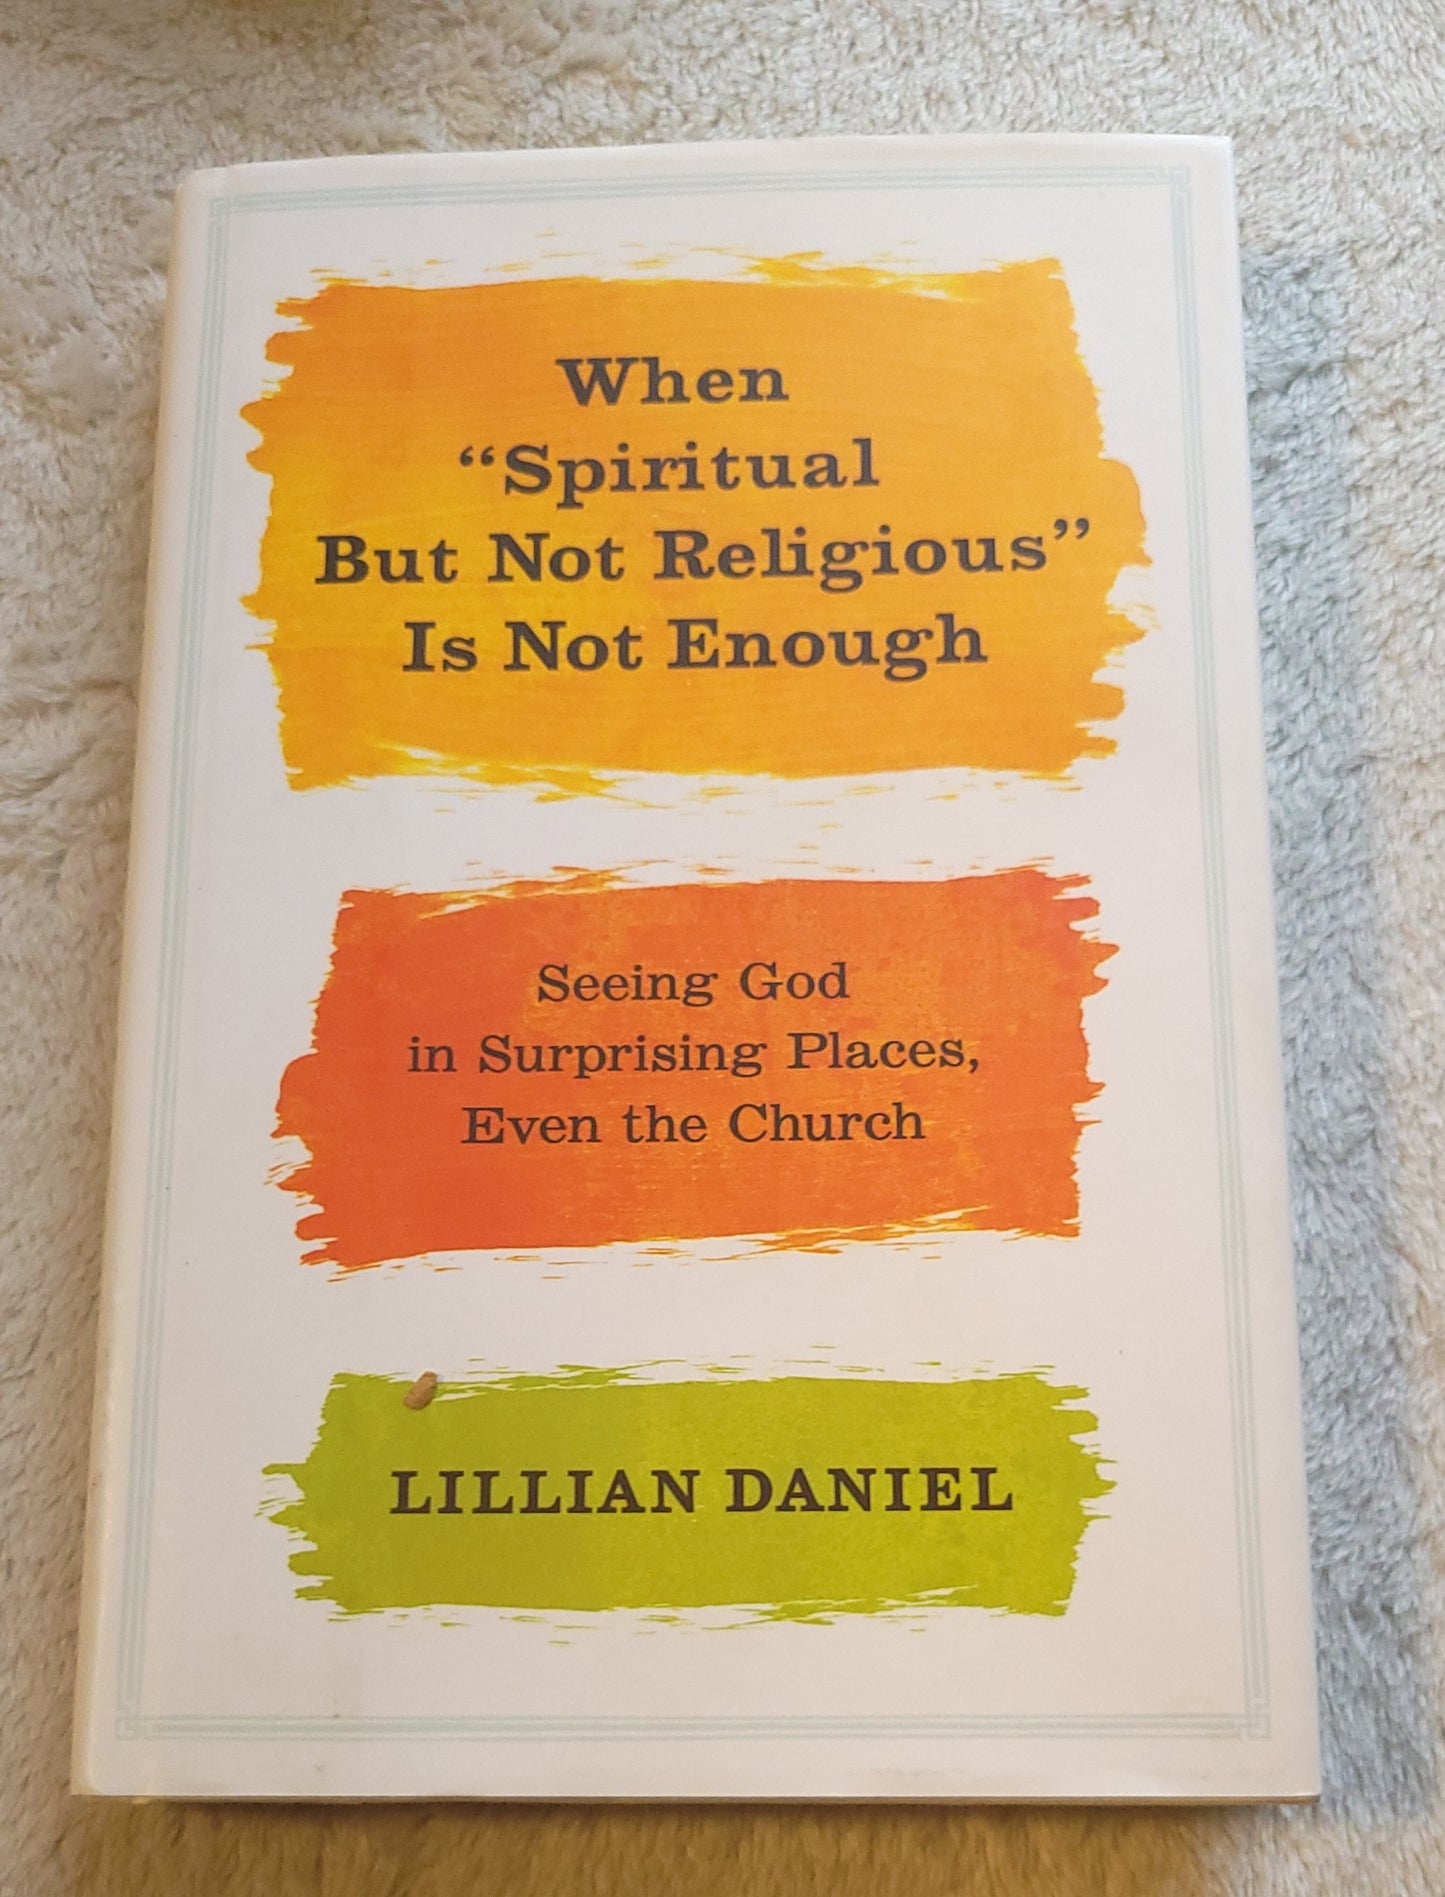 Used book for sale "When "Spiritual but Not Religious" Is Not Enough: Seeing God in Surprising Places, Even the Church" by Lillian Daniel, published by Jericho Books, 2014. Front cover.